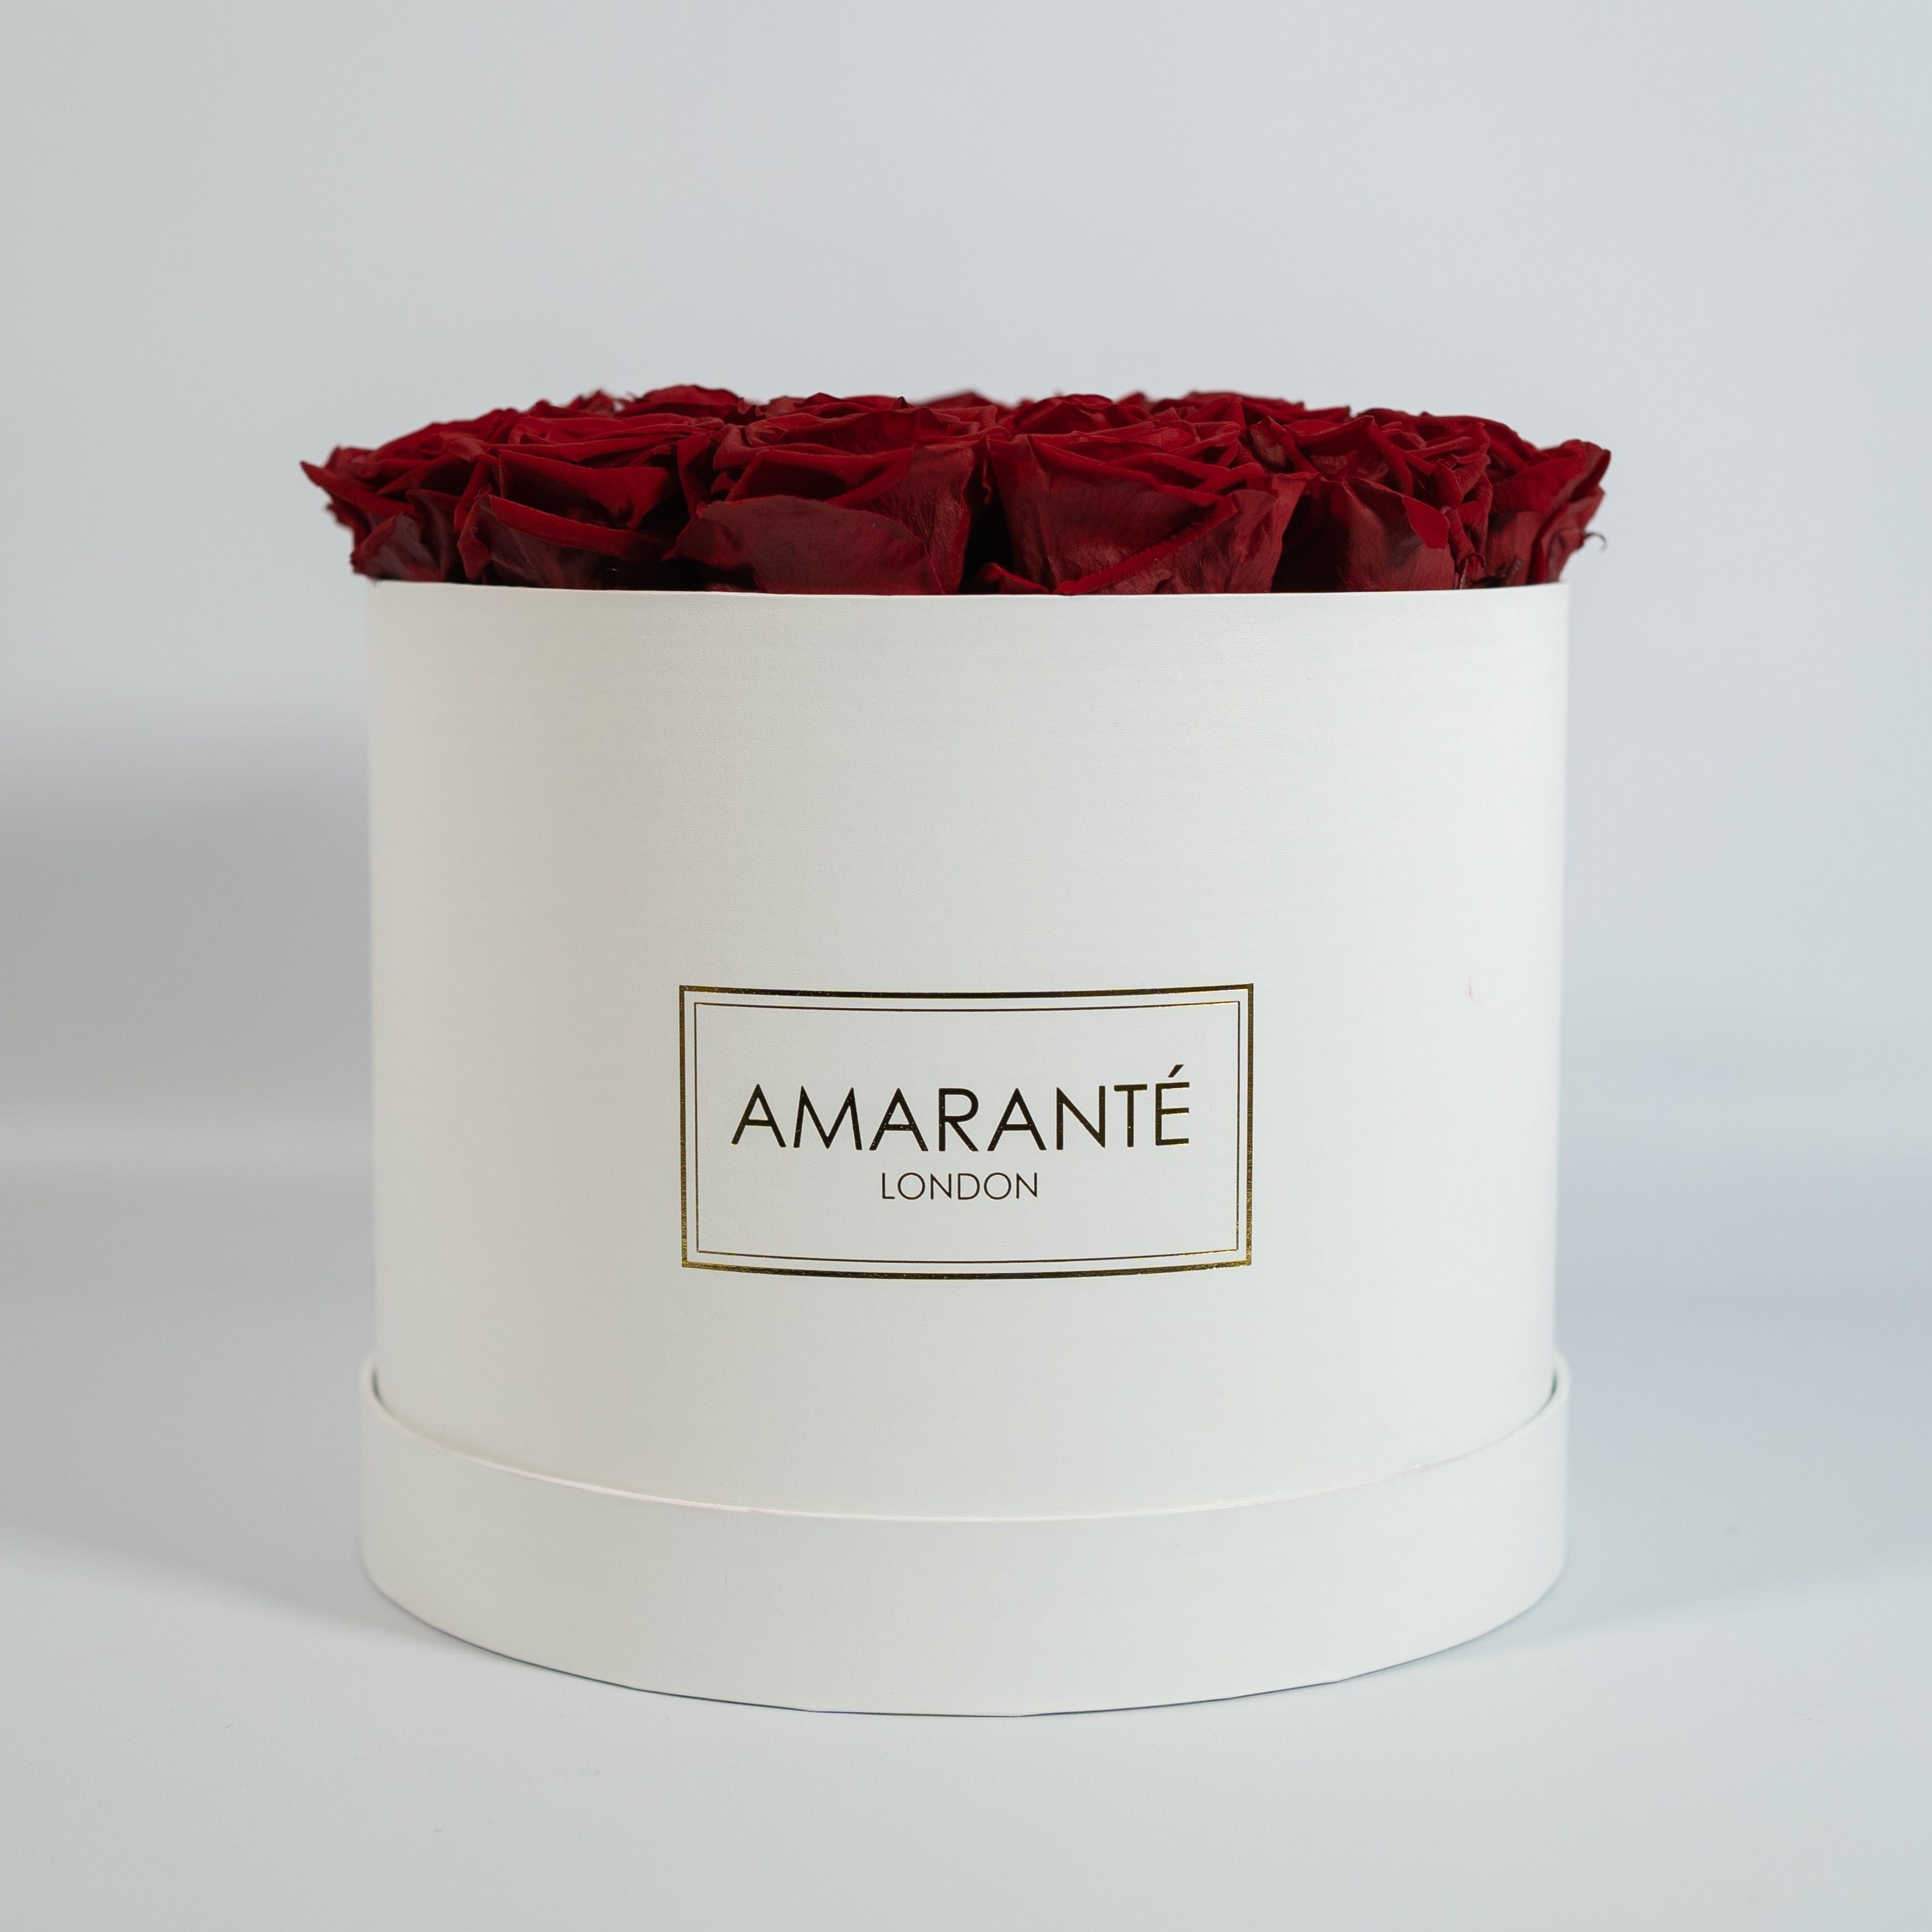 Dreamy wine red Roses manifested in a gorgeous white box 